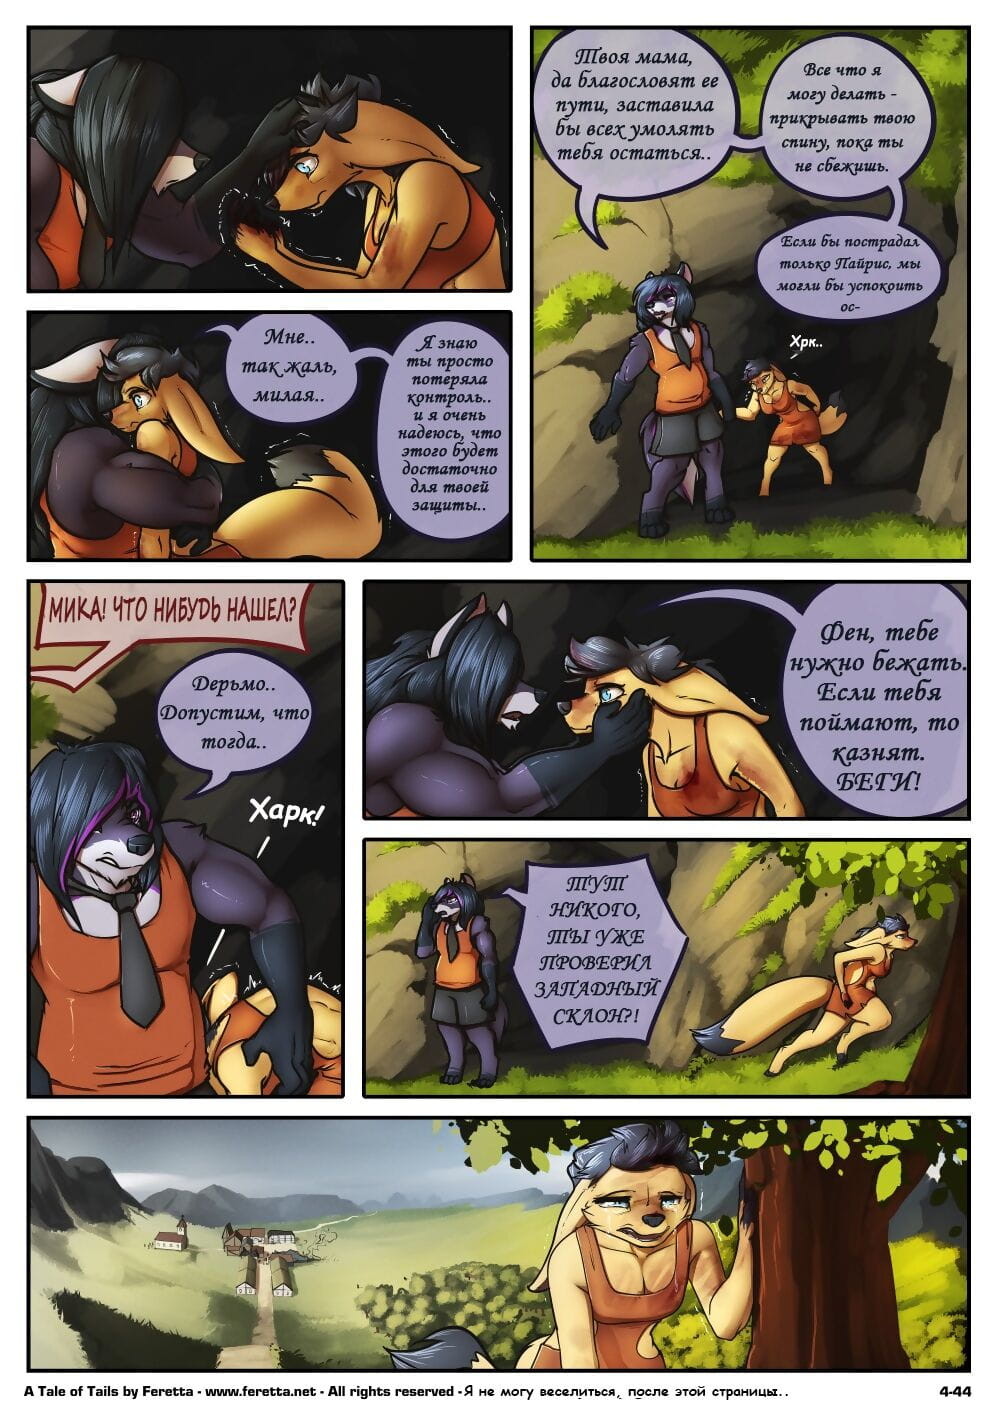 A Tale of Tails: Chapter 4 - Matters of the mind - A Tale of Tails: ????? 4 - ???????? ?????? - part 3 page 1